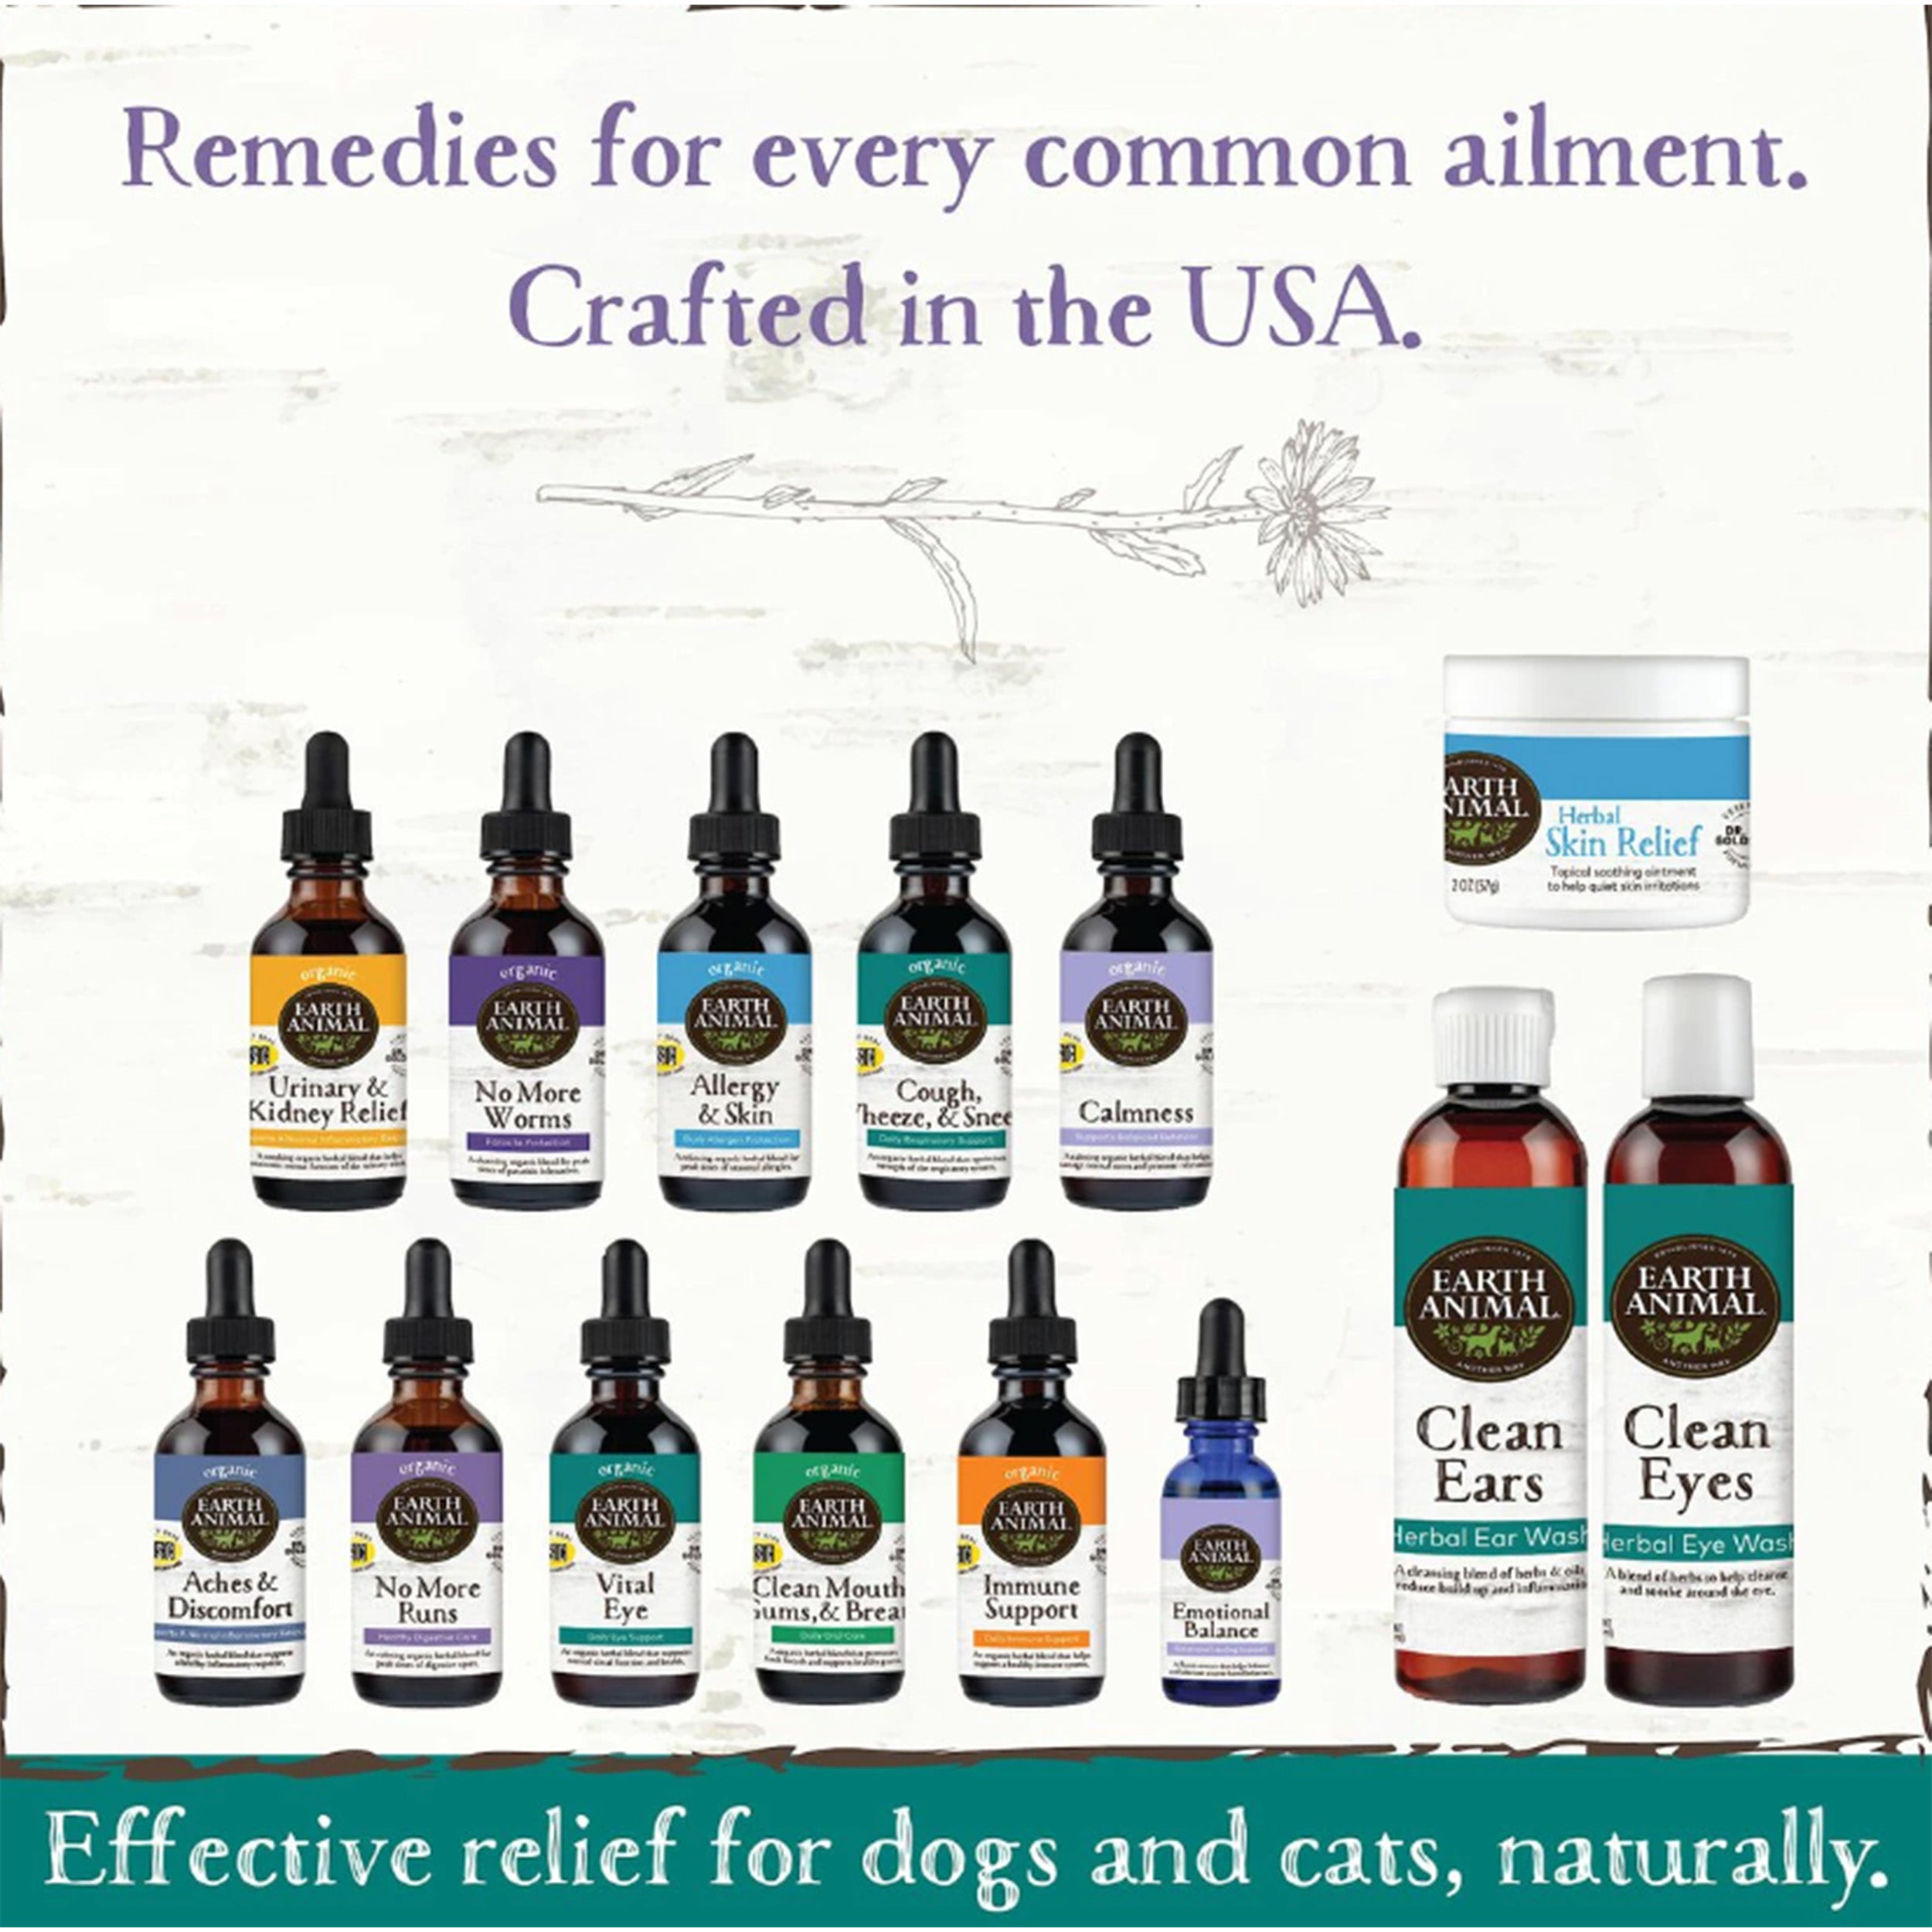 Earth Animal Natural Remedies Cough, Wheeze & Sneeze Liquid Homeopathic Respiratory Supplement for Dogs & Cats, 2-oz bottle